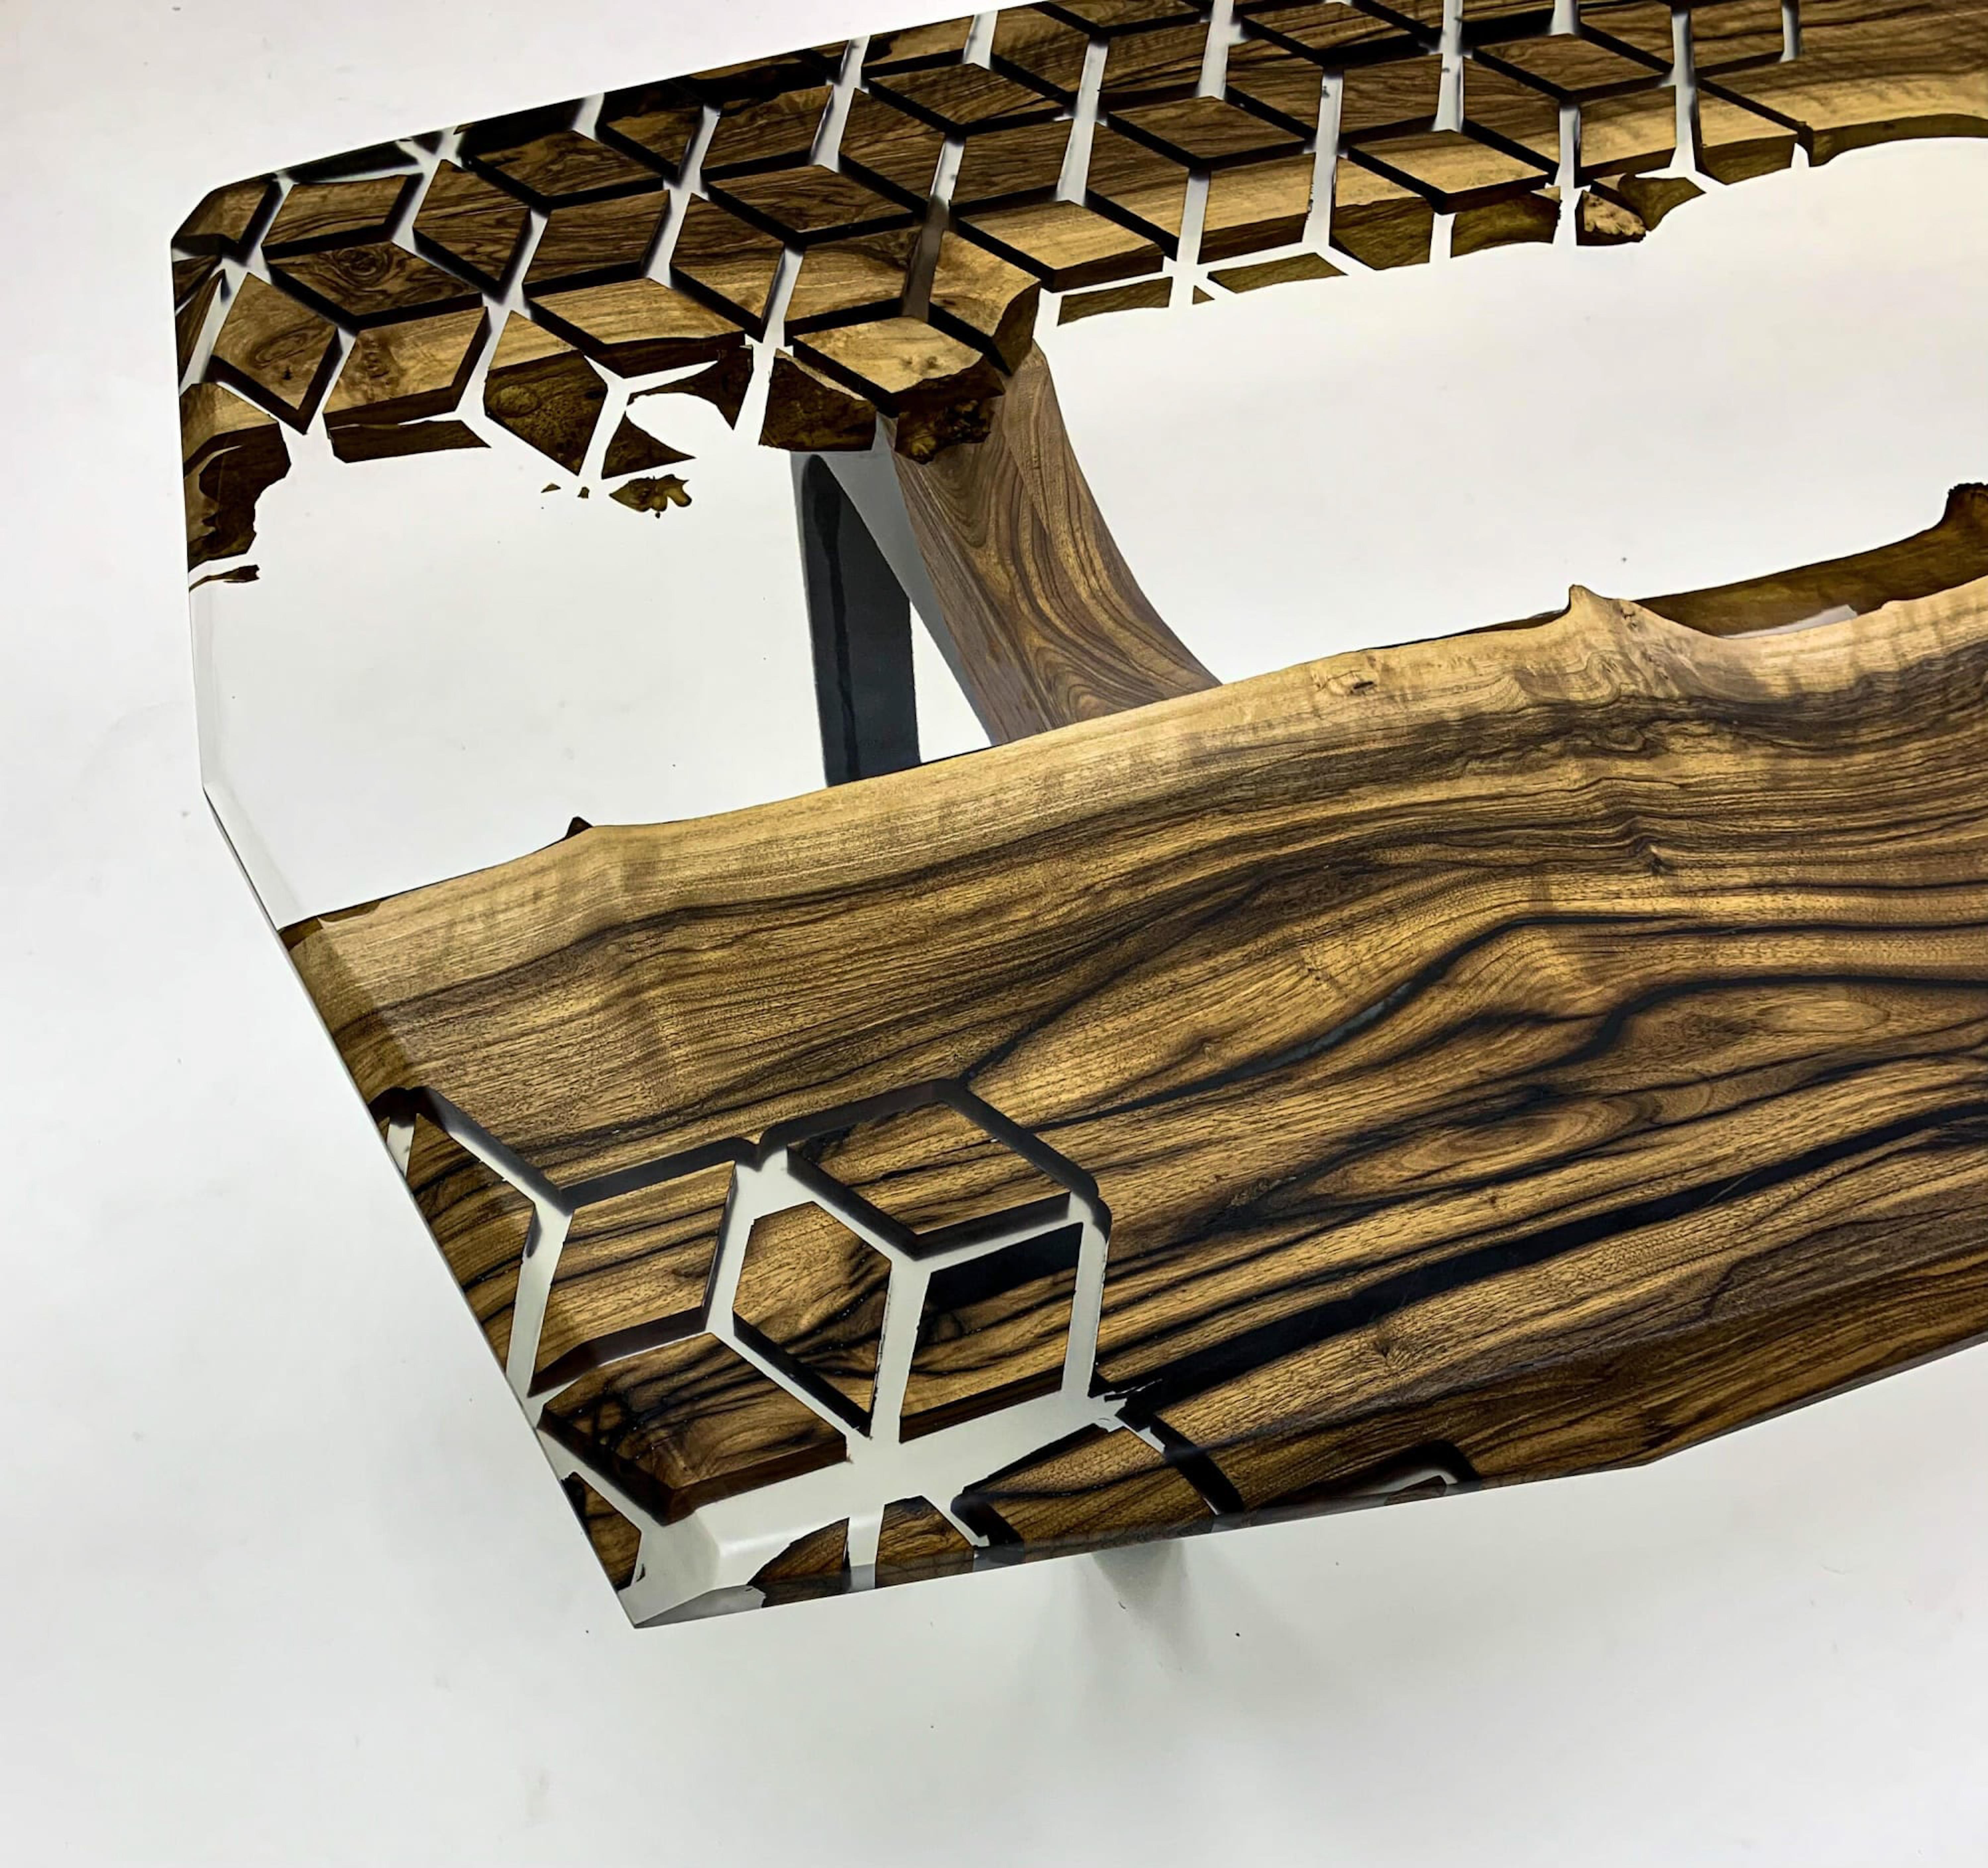 Diamond Shaped Epoxy Resin Table

This table is made of walnut wood. The patterns are made with CNC. Other parts are completely handmade.

Custom sizes, colours and finishes are available!